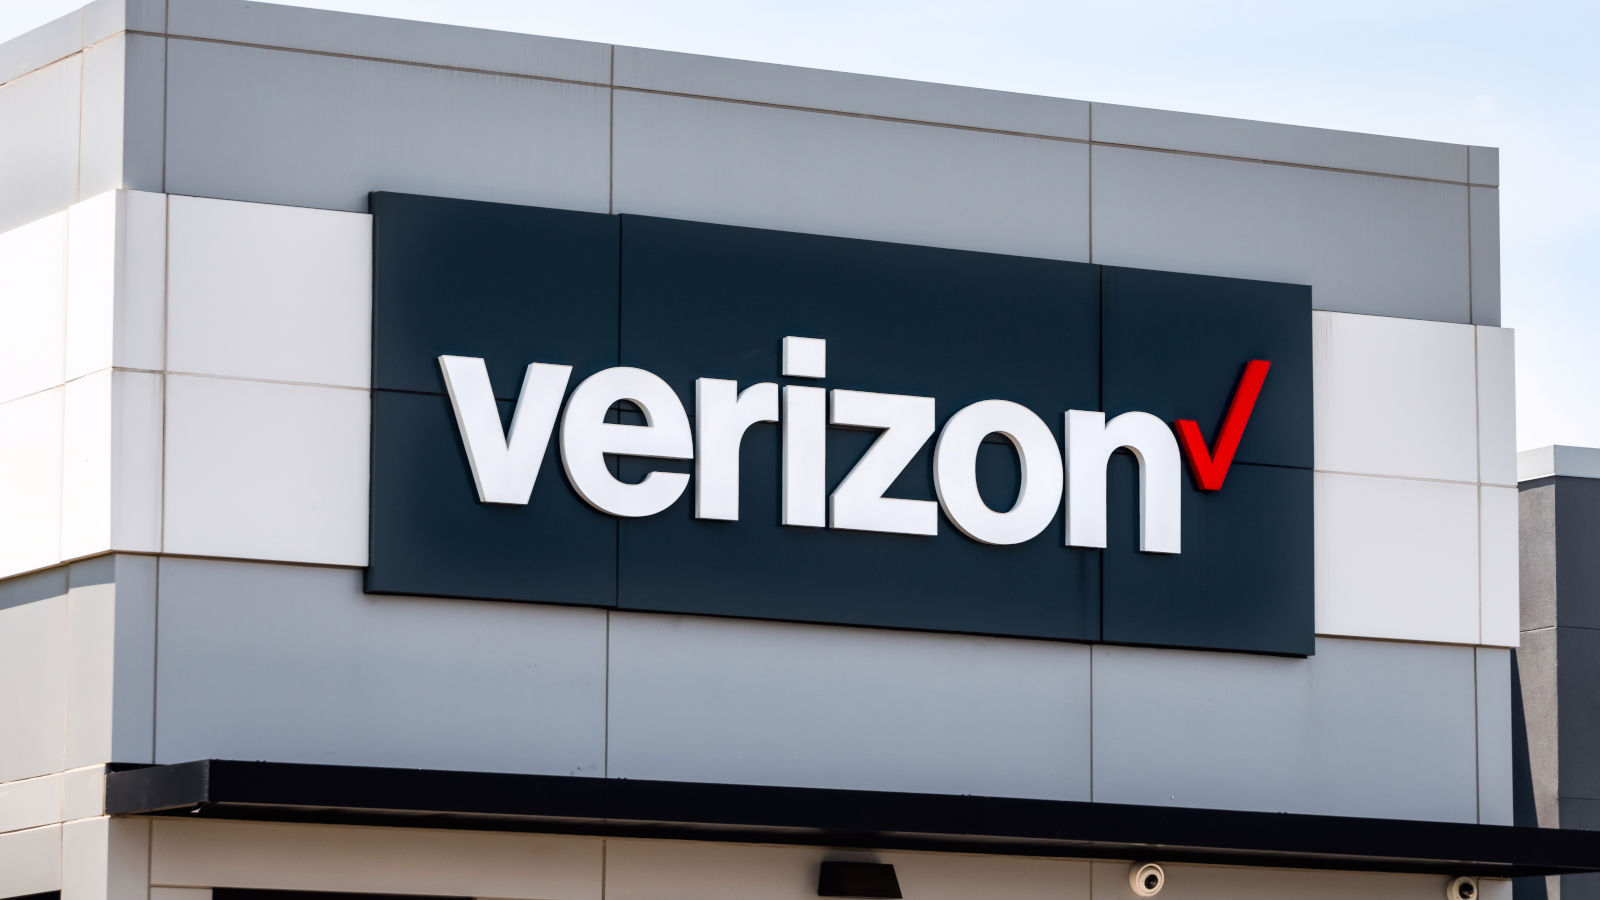 Verizon Introduces “Number Lock” for Protection Against...